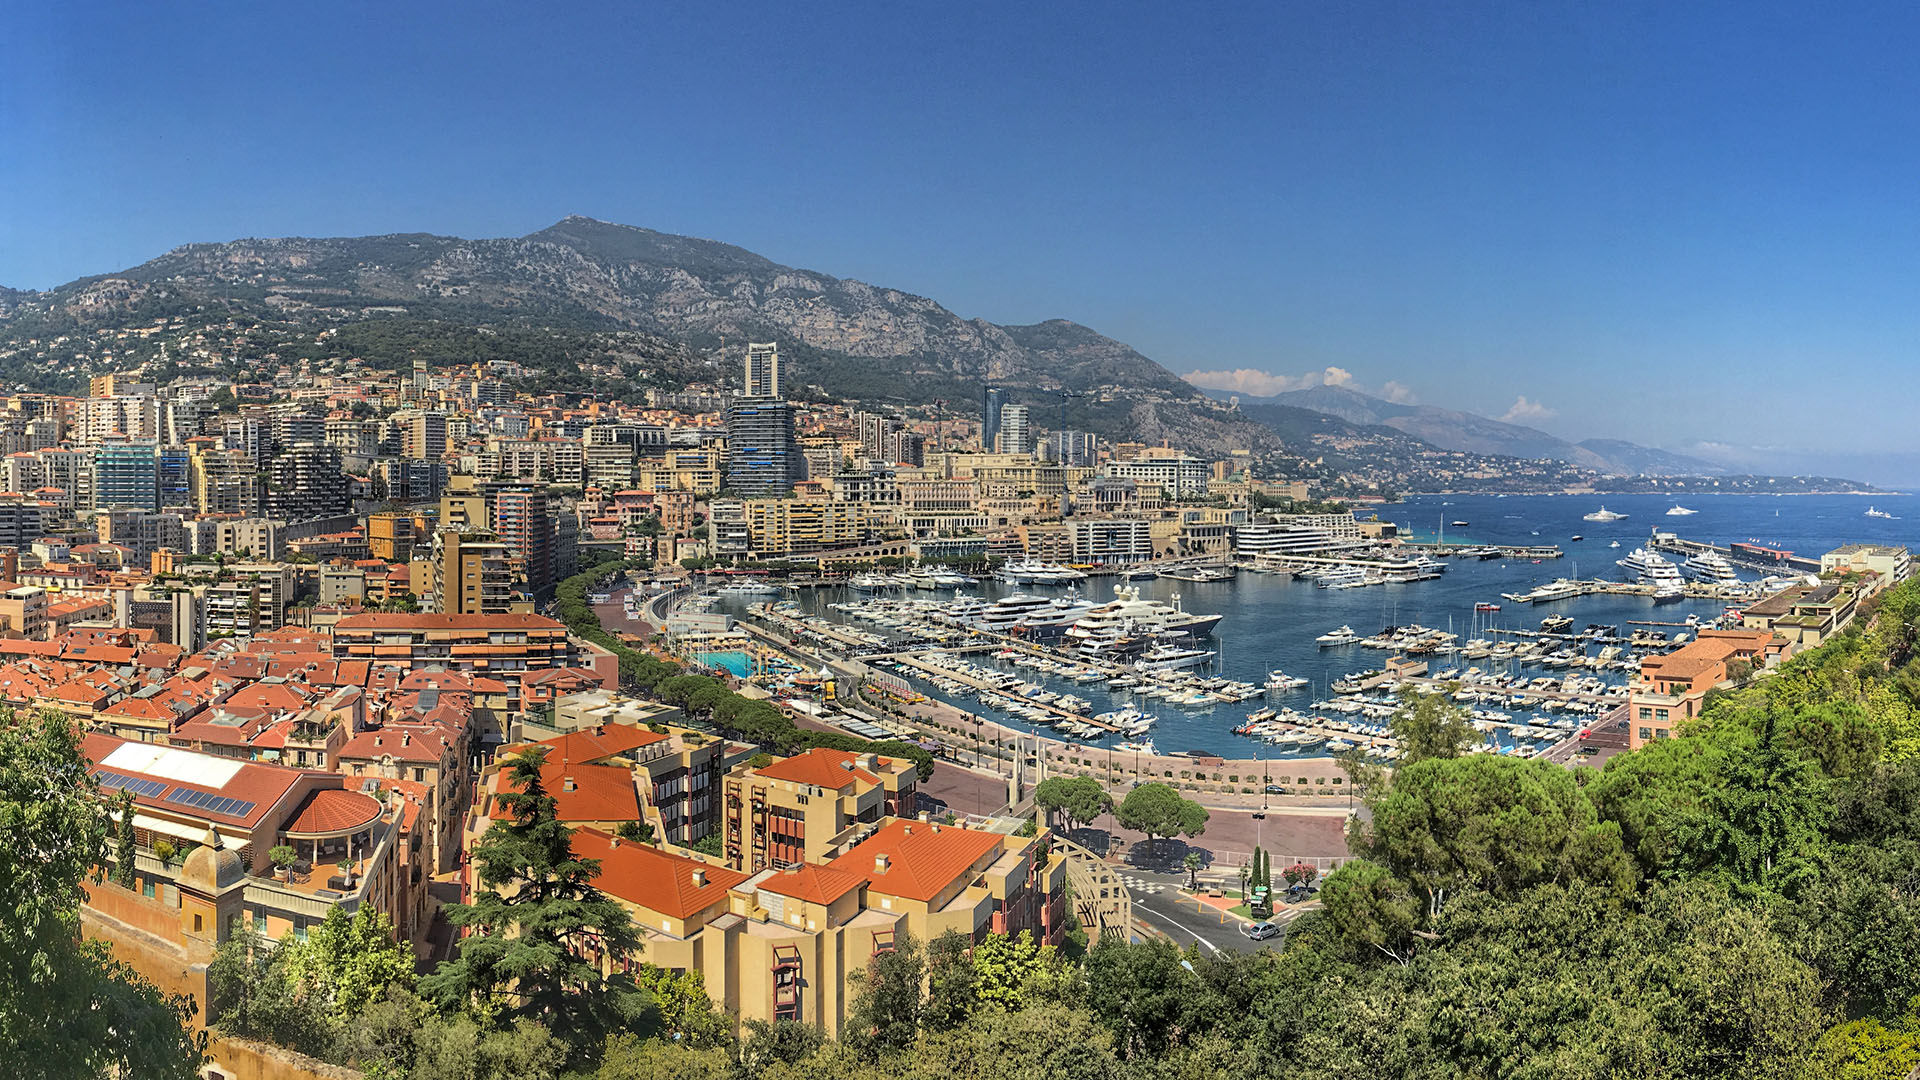 A view of Monaco from the walk up to the palace